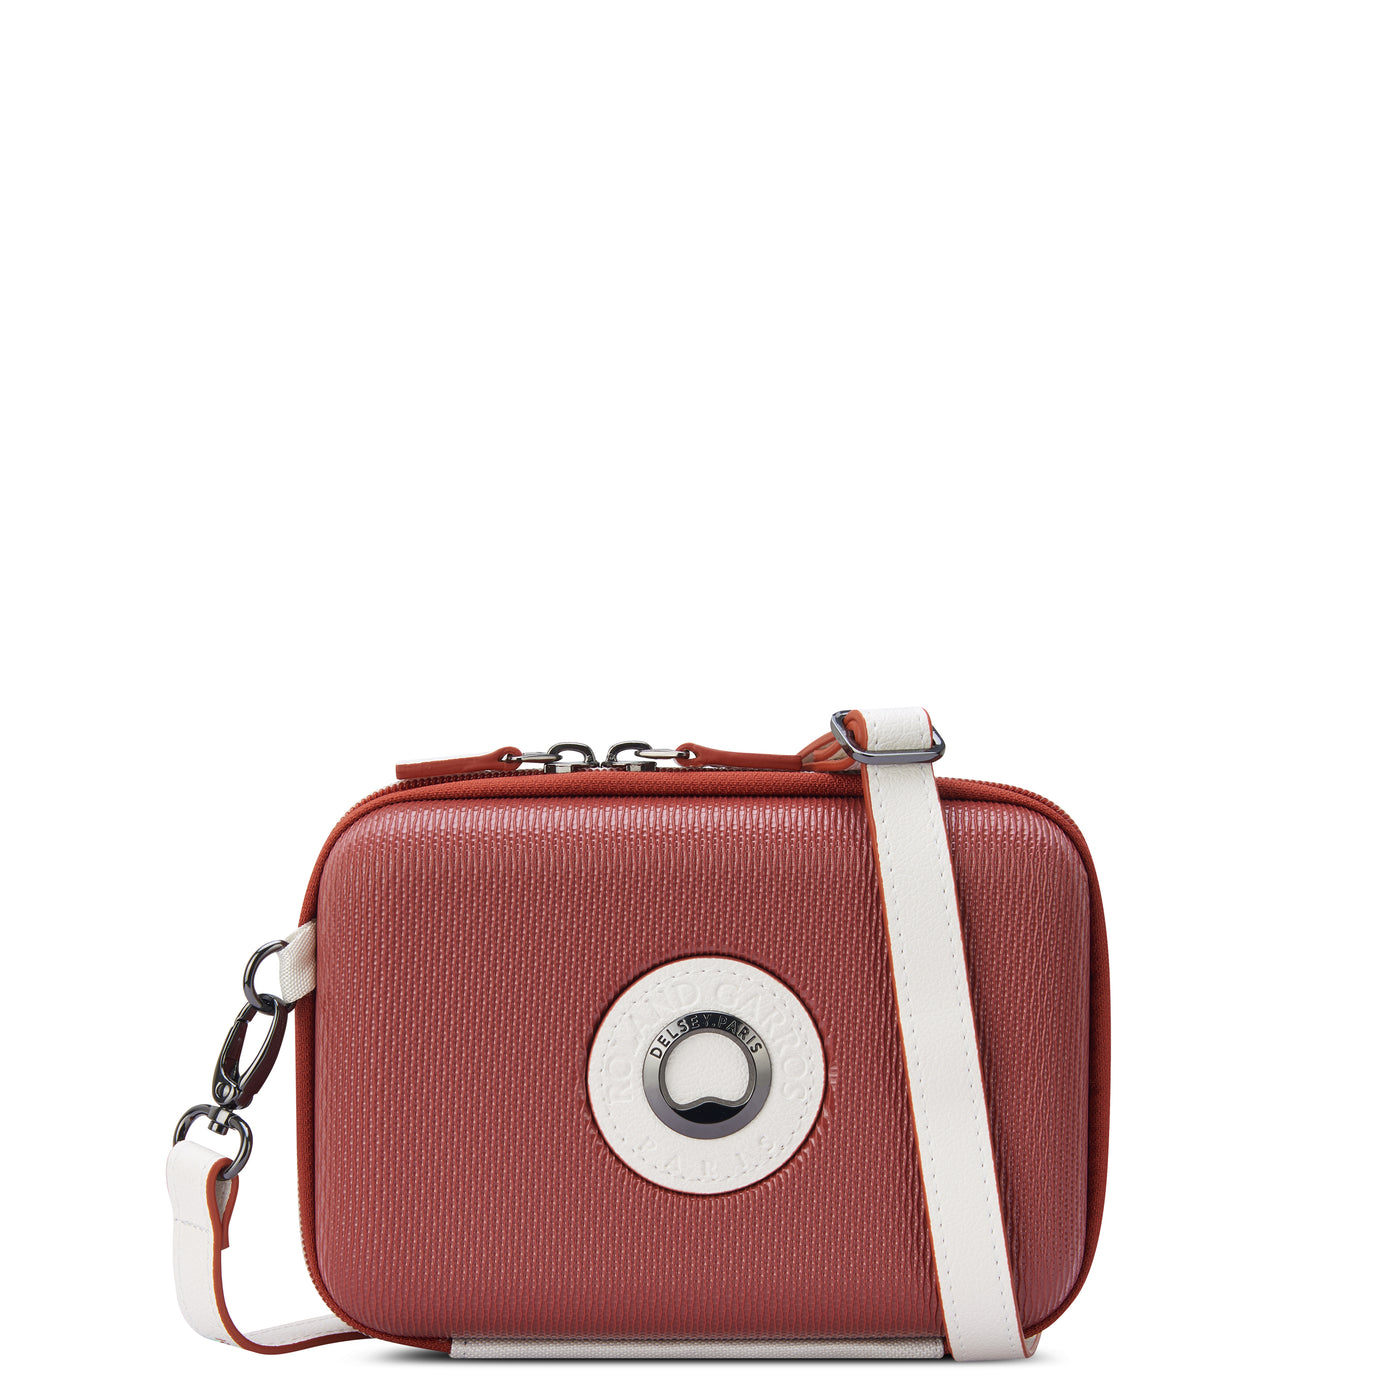 Shop The Latest Collection Of Delsey Chatelet Air 2.0 Clutch Rg In Lebanon